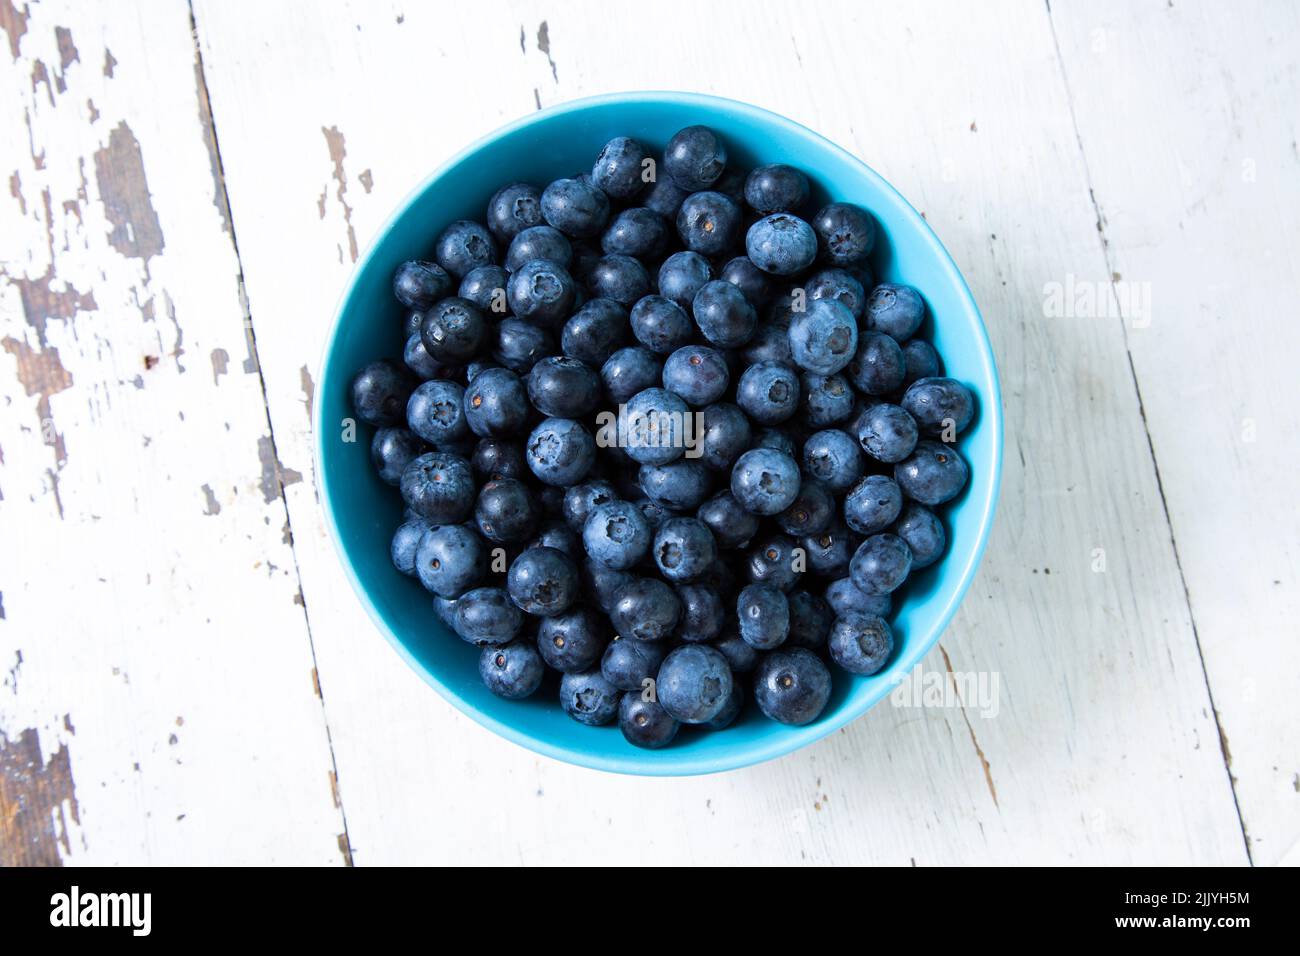 Top view of round bowl with blueberries on wooden table Stock Photo